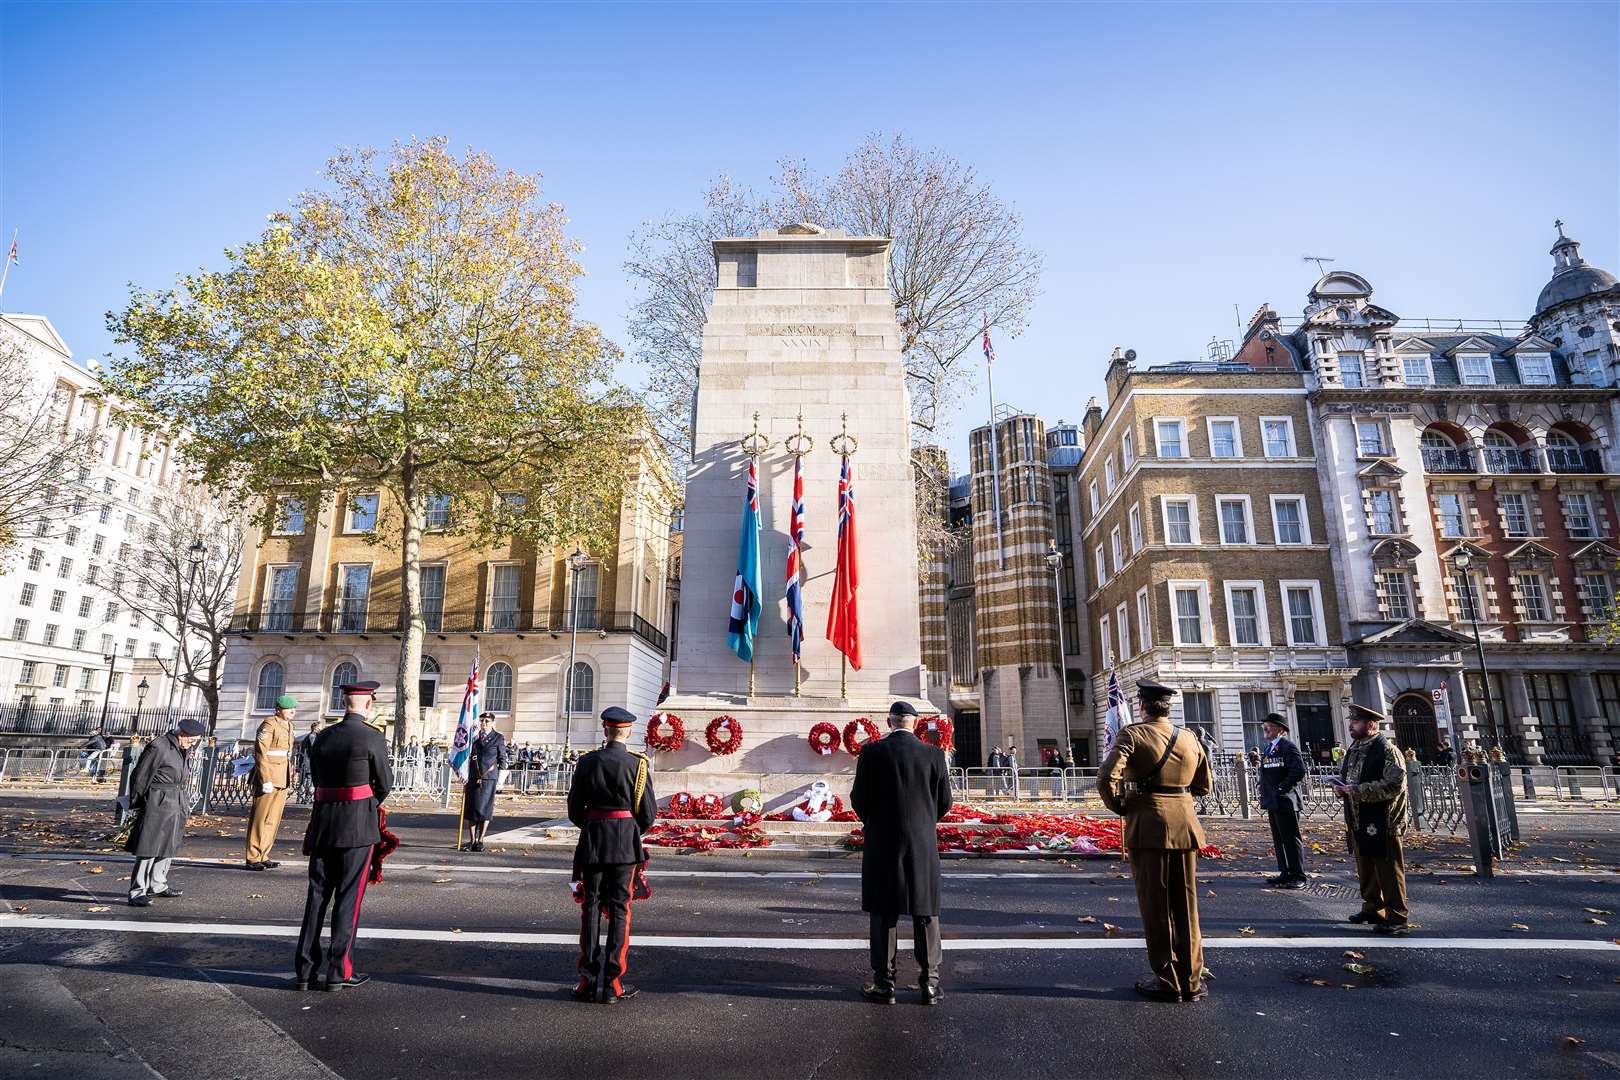 A small socially distanced ceremony took place at the Cenotaph (AJEX/PA)